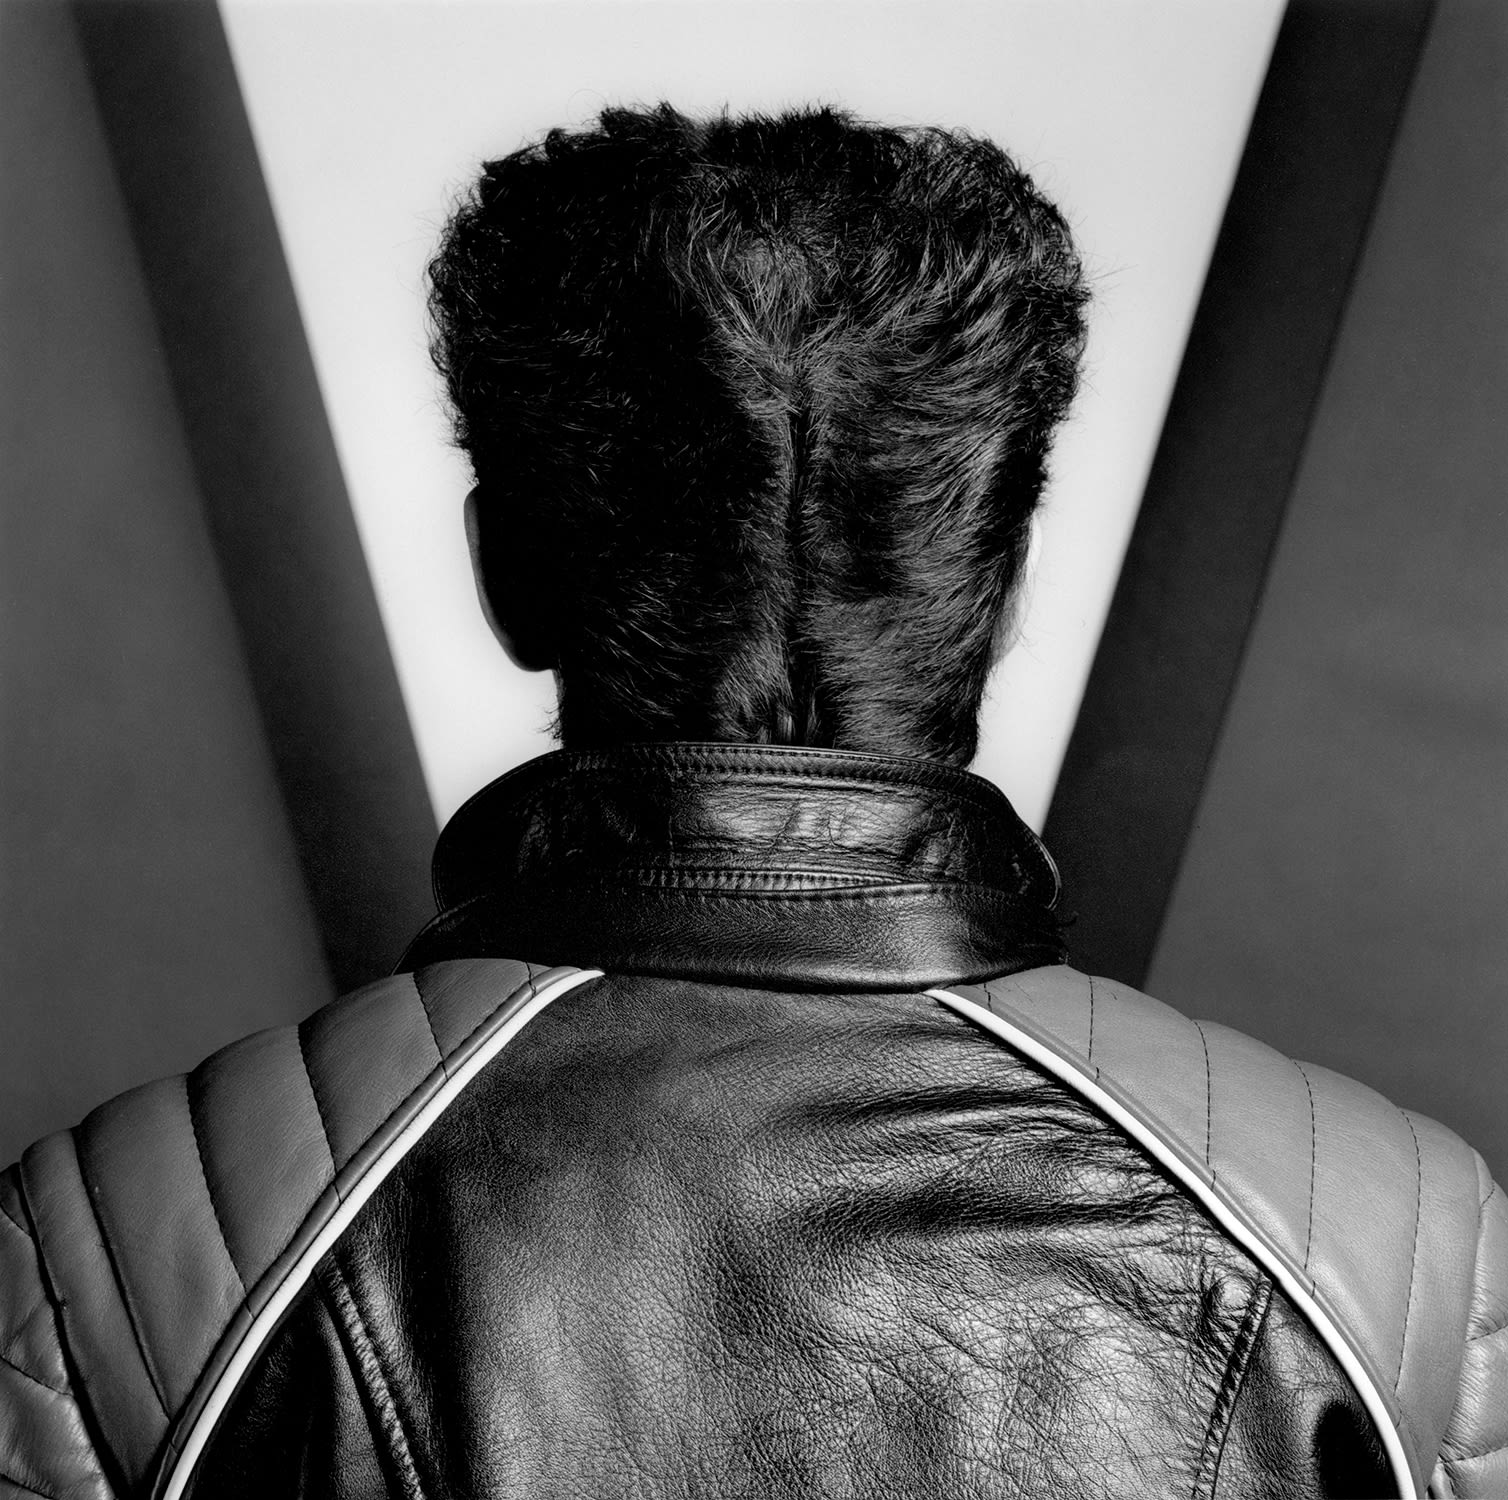 Robert Mapplethorpe, Self Portrait, 1981. © The Robert Mapplethorpe Foundation. Used by permission. Image provided by Kukje Gallery, Seoul and Busan.